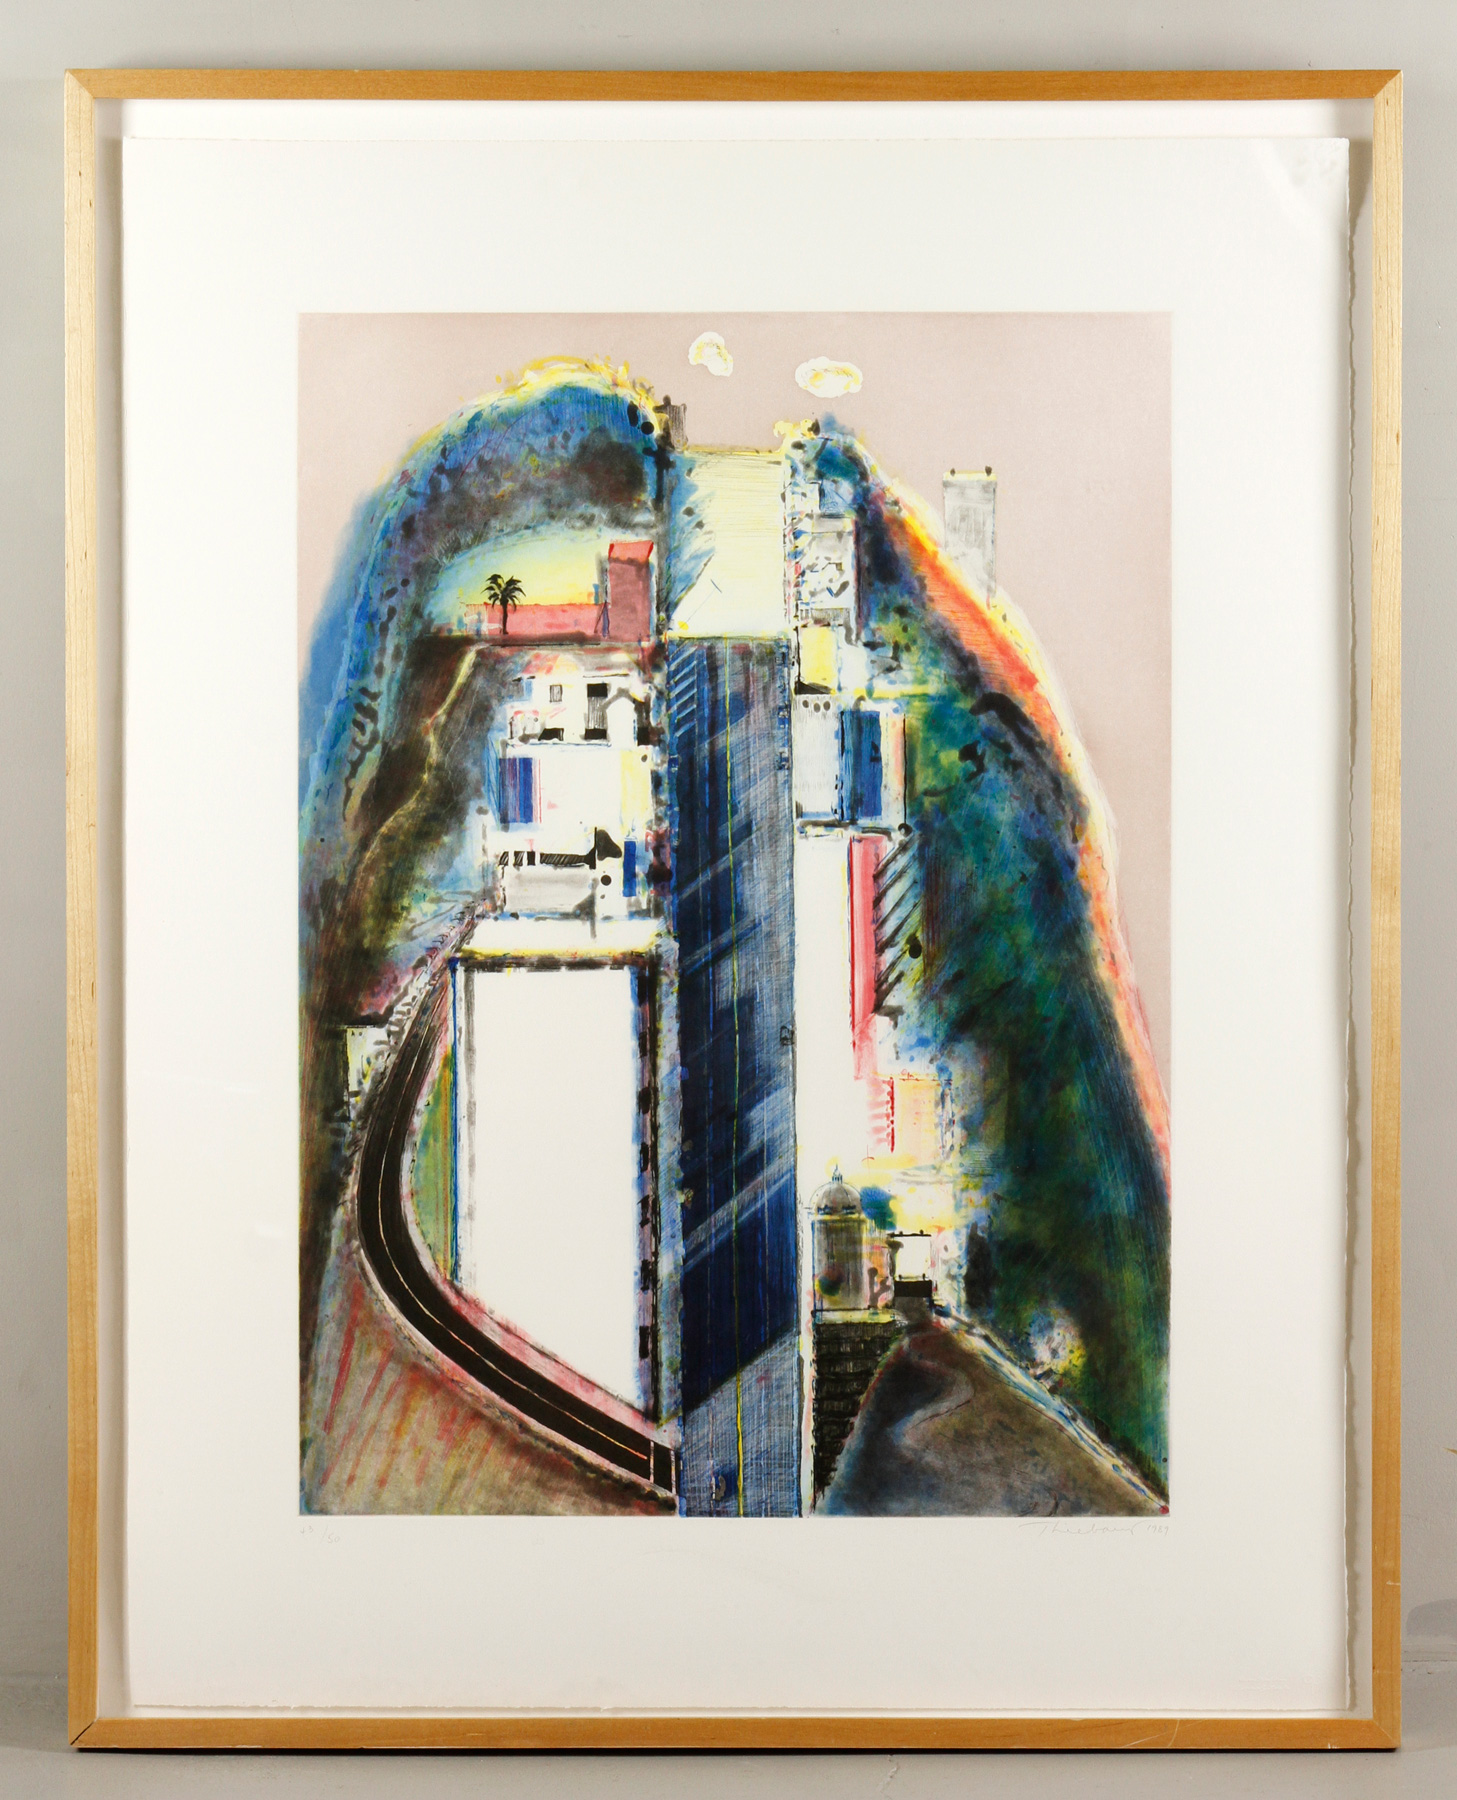 Wayne Thiebaud (American, b. 1920), "Steep Street," color spit-bite aquatint with dry point etching, edition 43/50, dated 1989